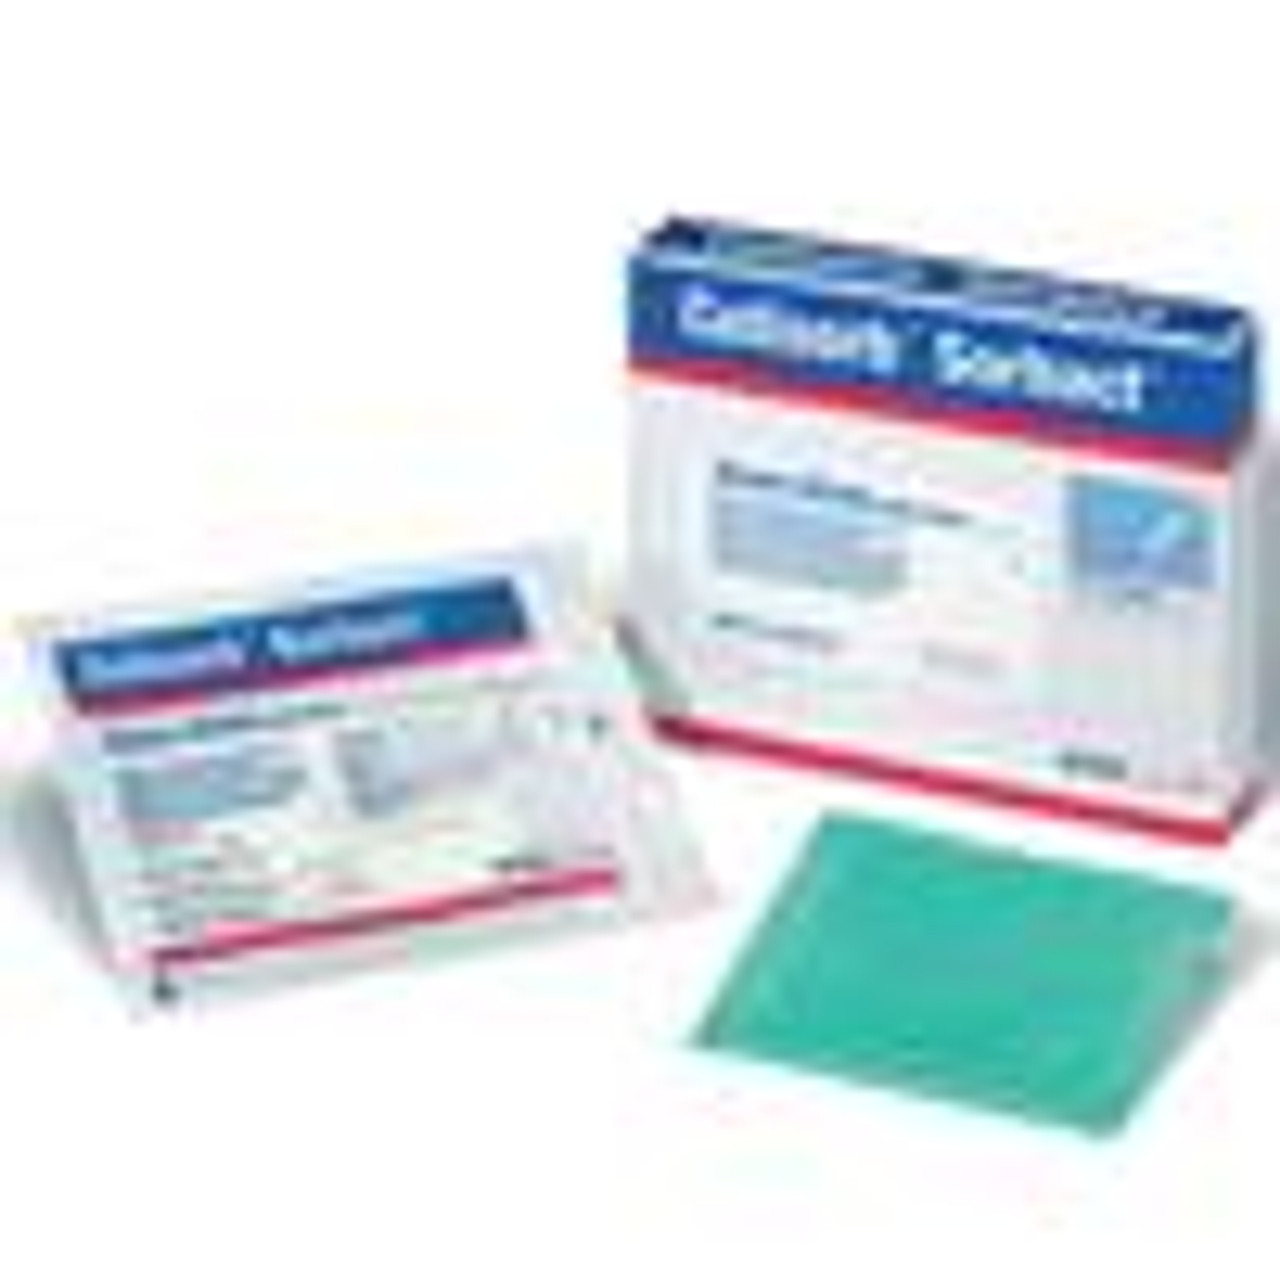 BSN 7269800 CUTIMED SORBION SORBACT ANTIMICROBIAL DRESSING WITH DACC, STERILE, 10 CM X 10 CM BX/10 (BSN 7269800)